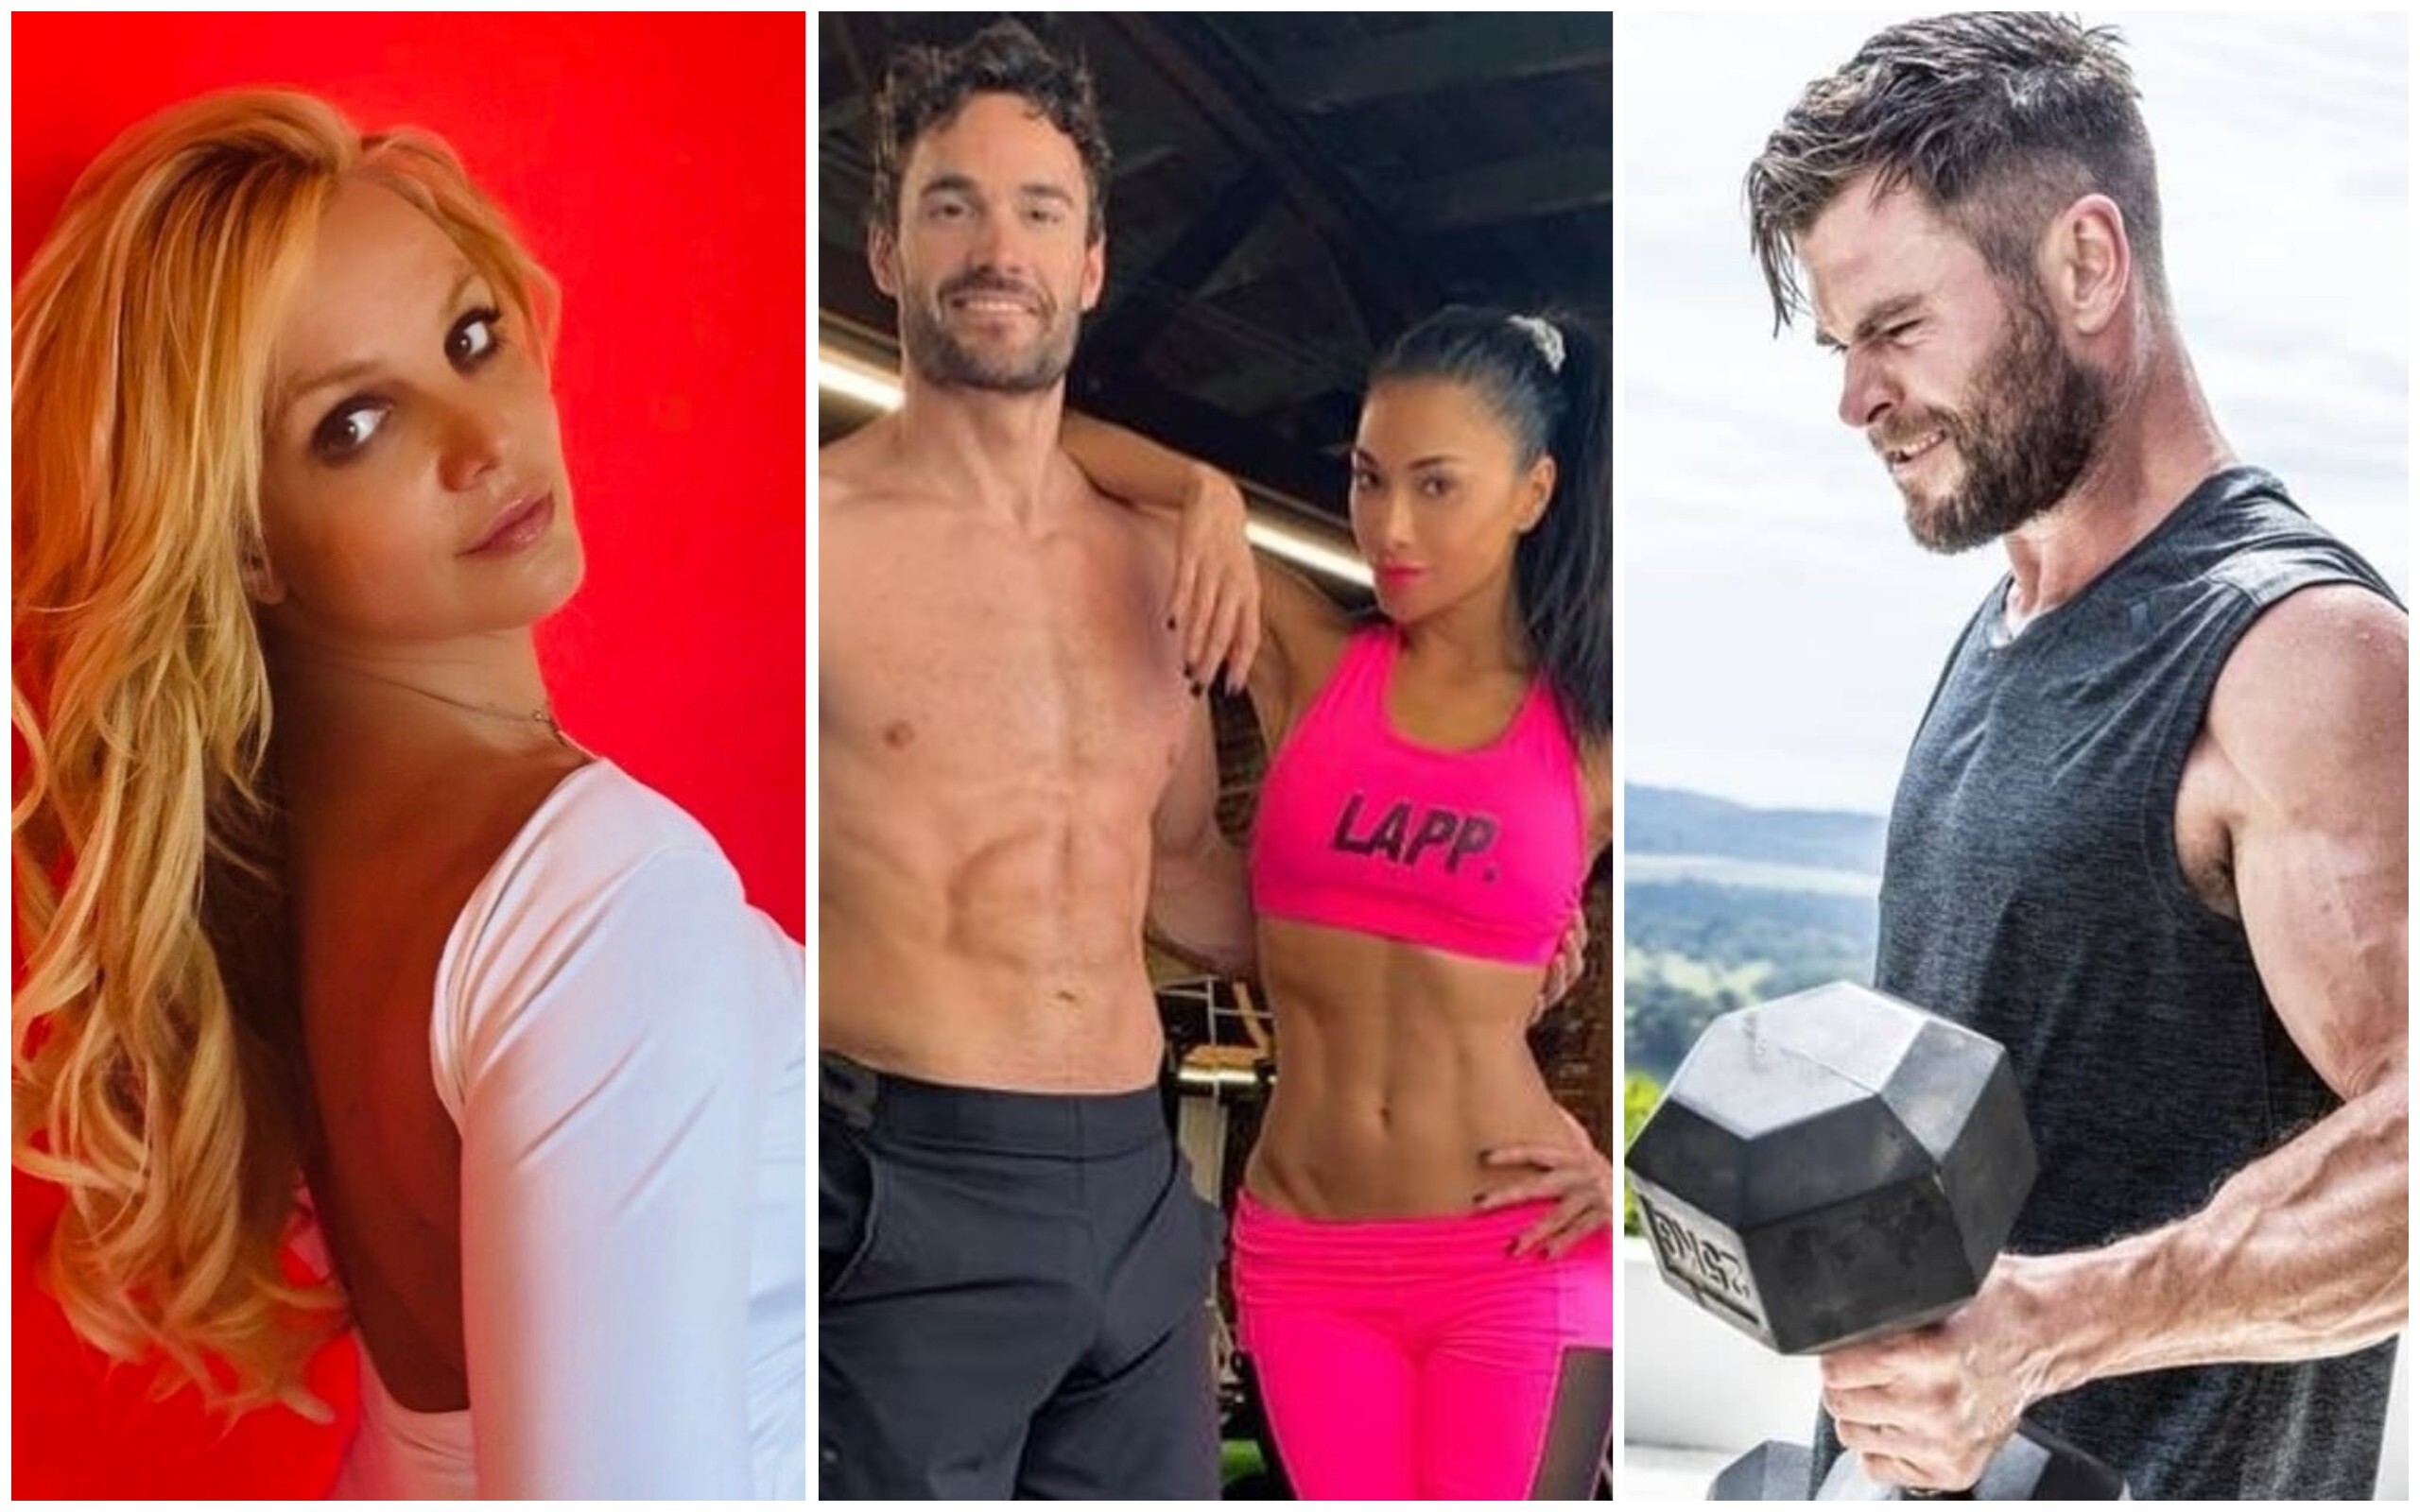 Up your home workout game like celebrities Britney Spears, Thom Evans and Nicole Scherzinger, and Chris Hemsworth. Photo: Instagram